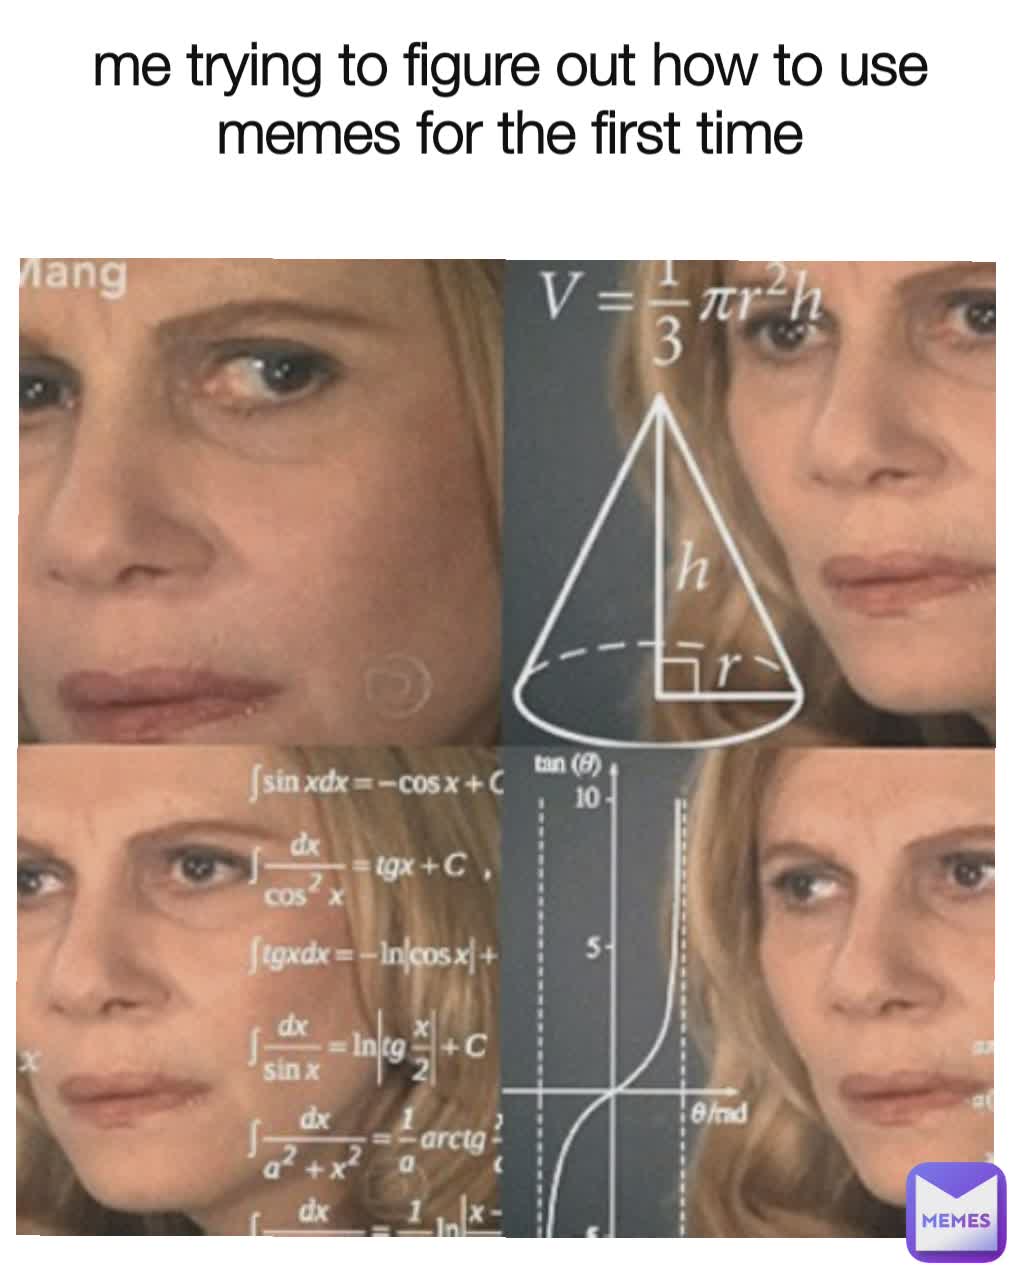 me trying to figure out how to use memes for the first time
